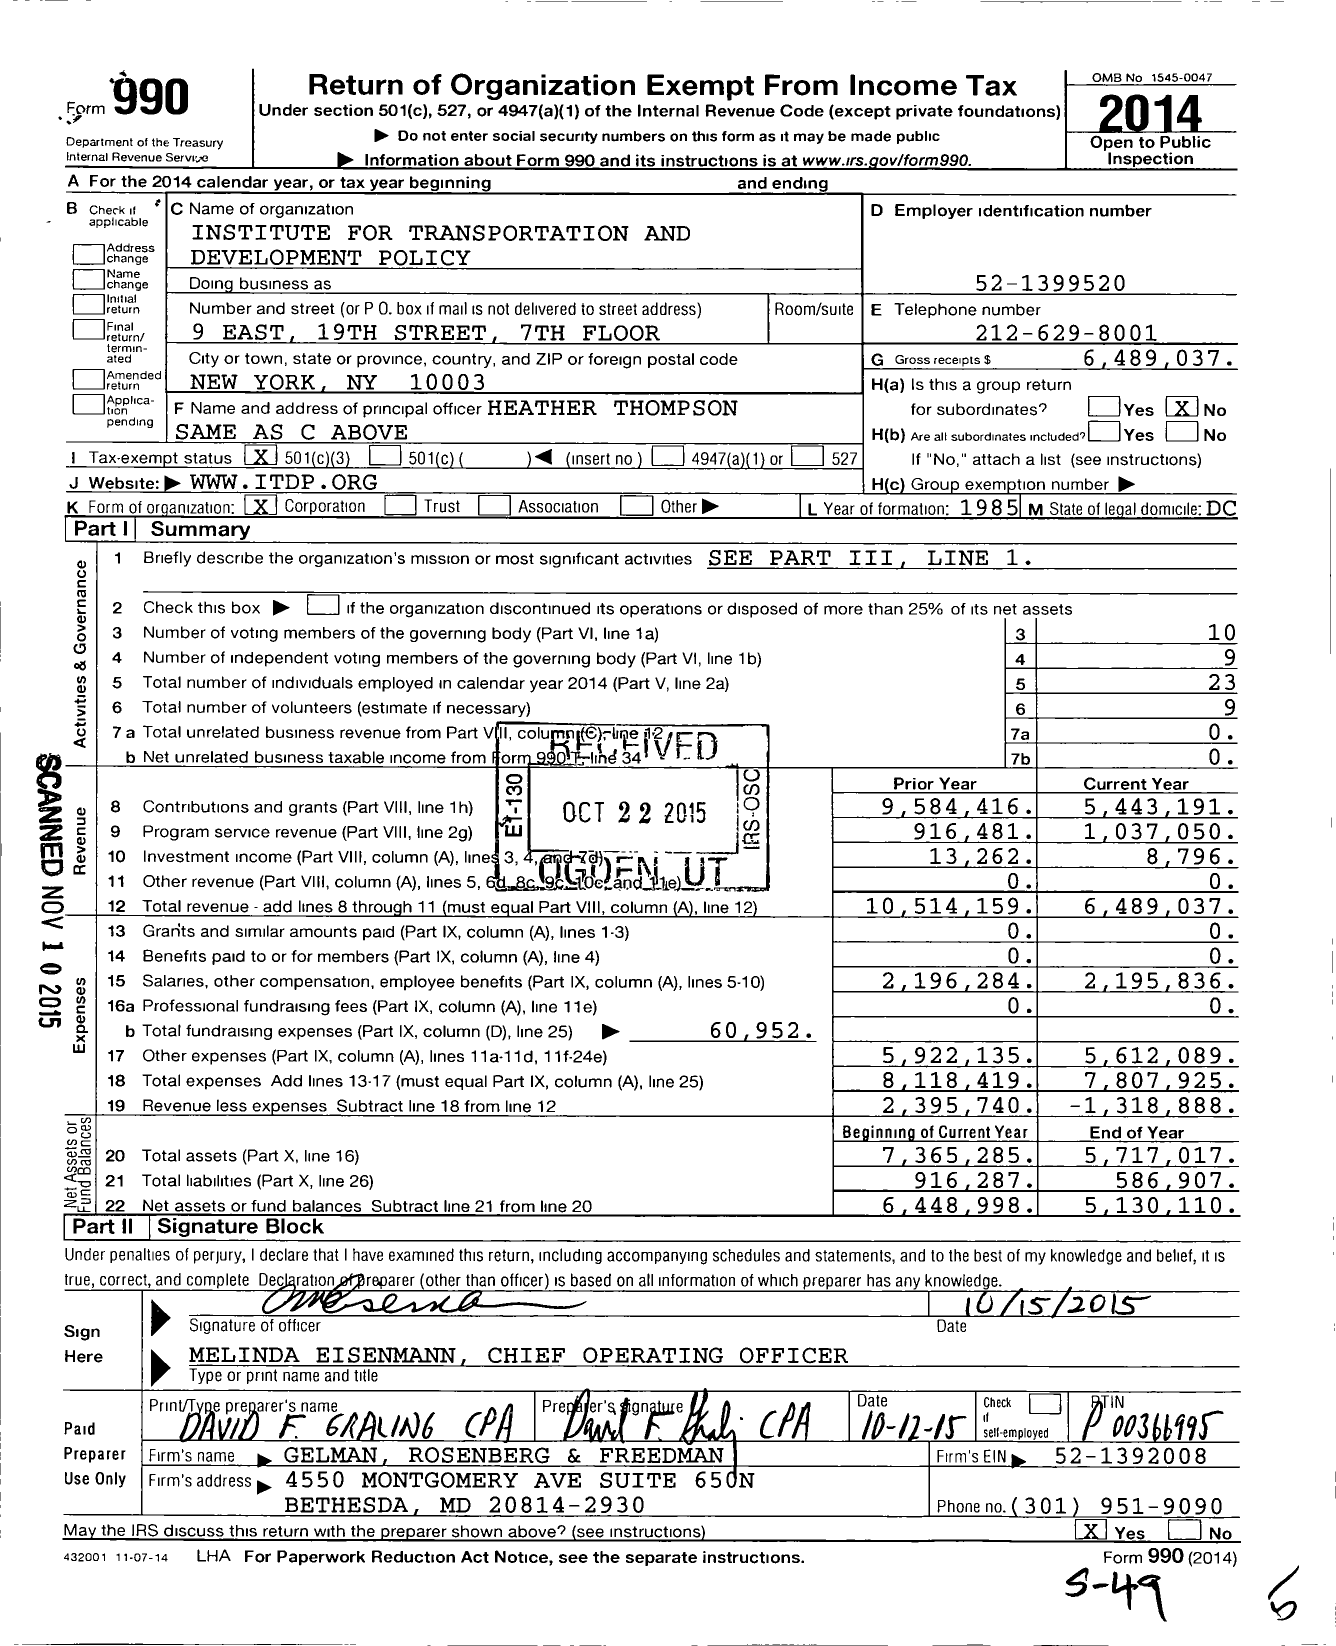 Image of first page of 2014 Form 990 for Institute for Transportation and Development Policy (ITDP)